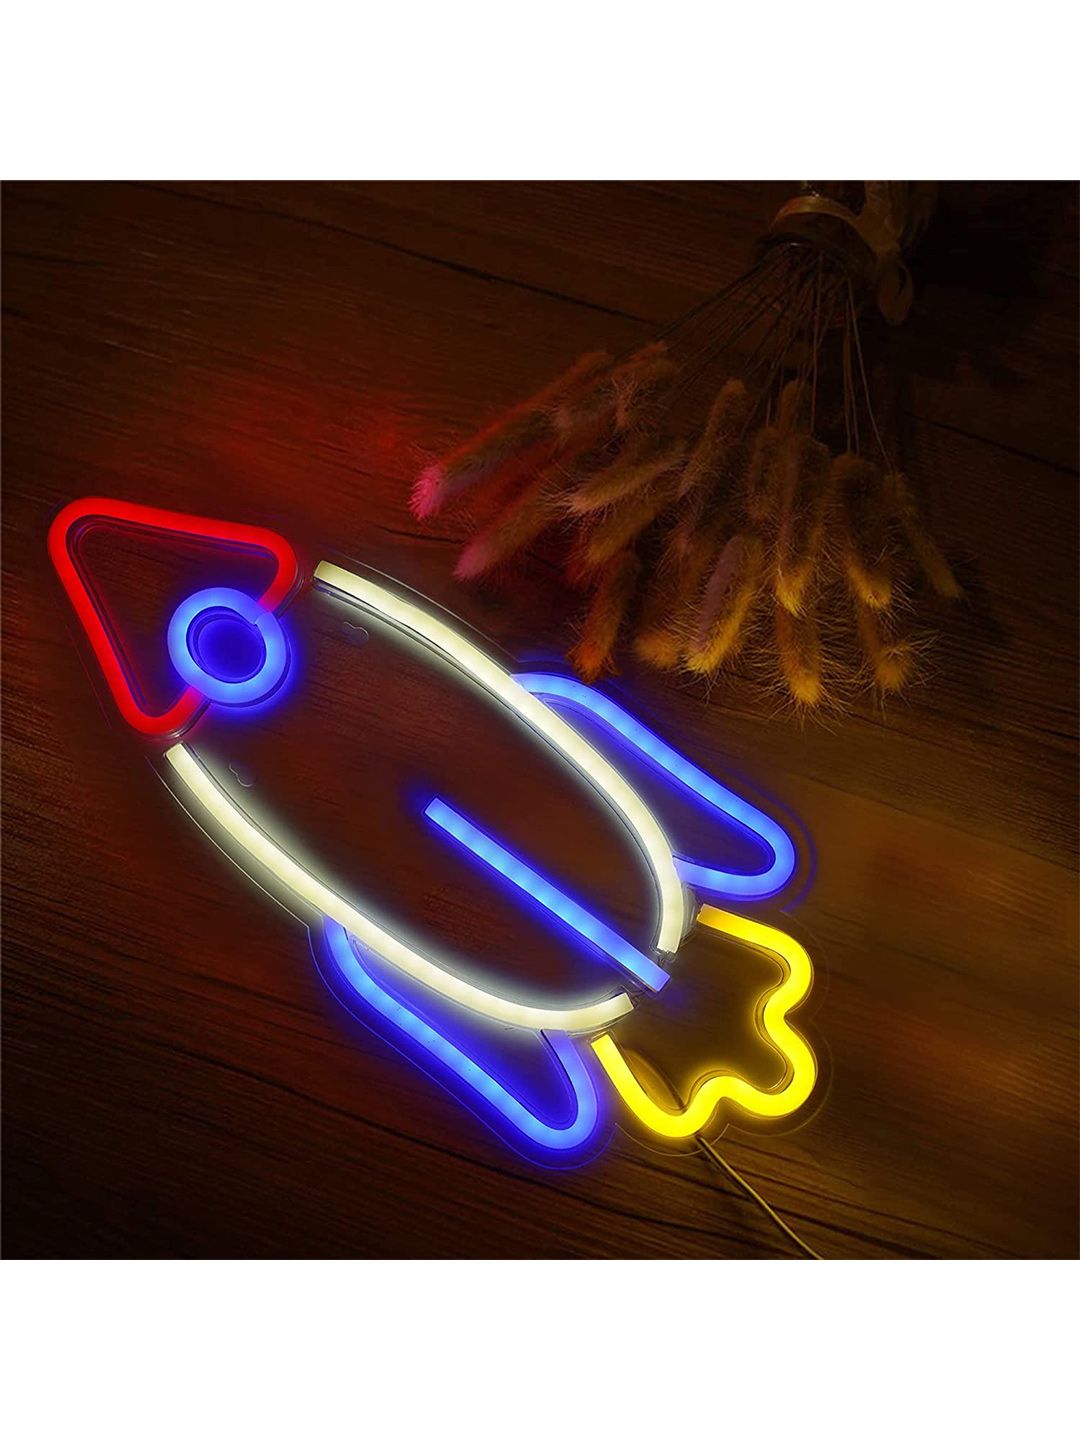 XERGY Blue & White Rocket Shaped Signs Hanging Wall Lamps Price in India